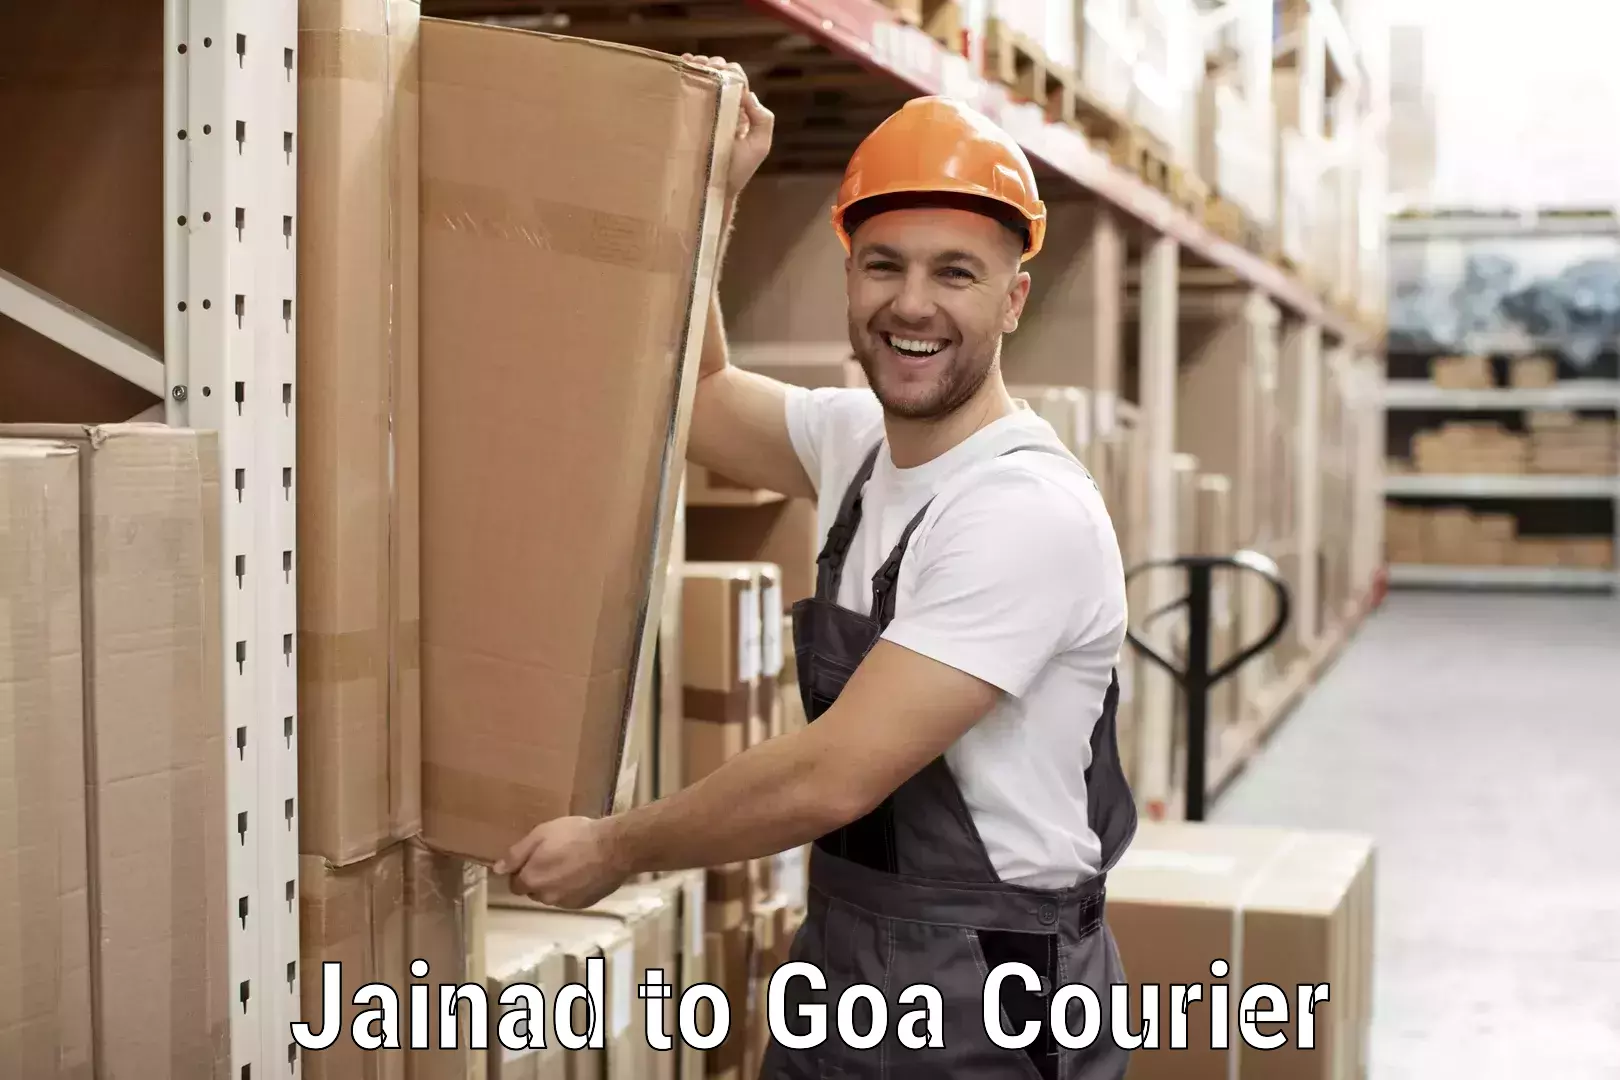 Easy access courier services in Jainad to Vasco da Gama